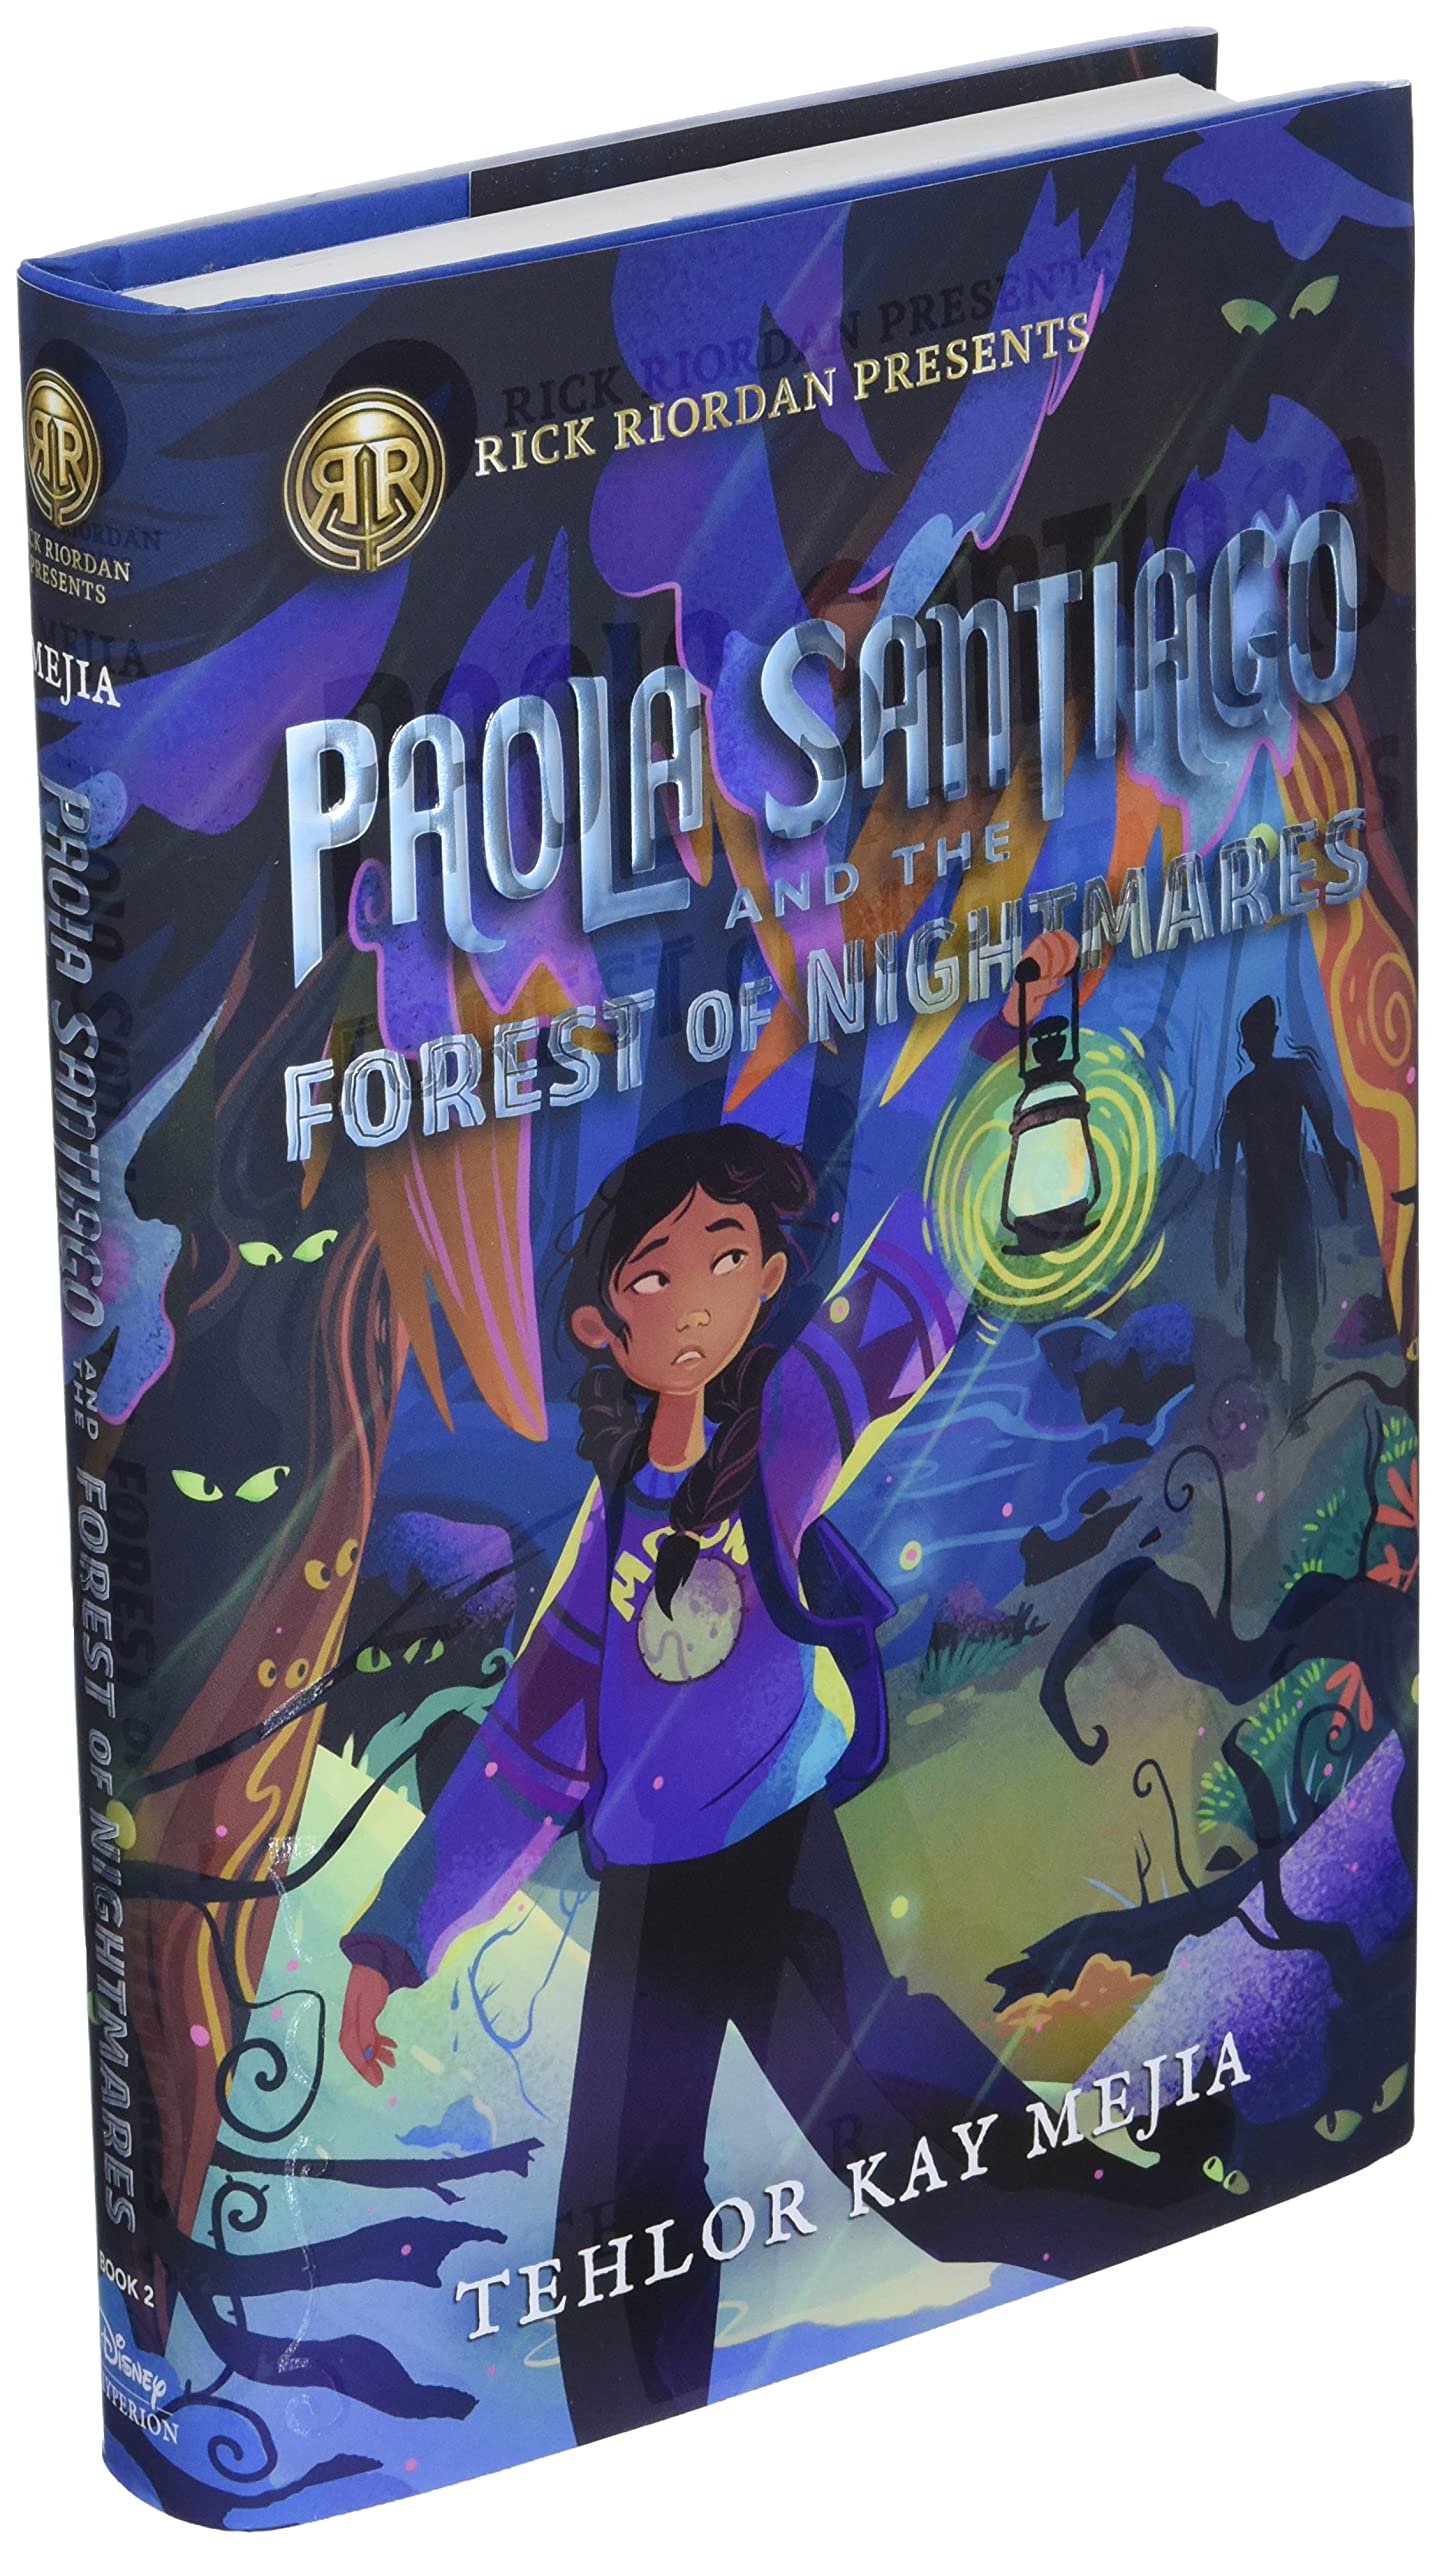 Paola Santiago and the Forest of Nightmares (Hardcover)